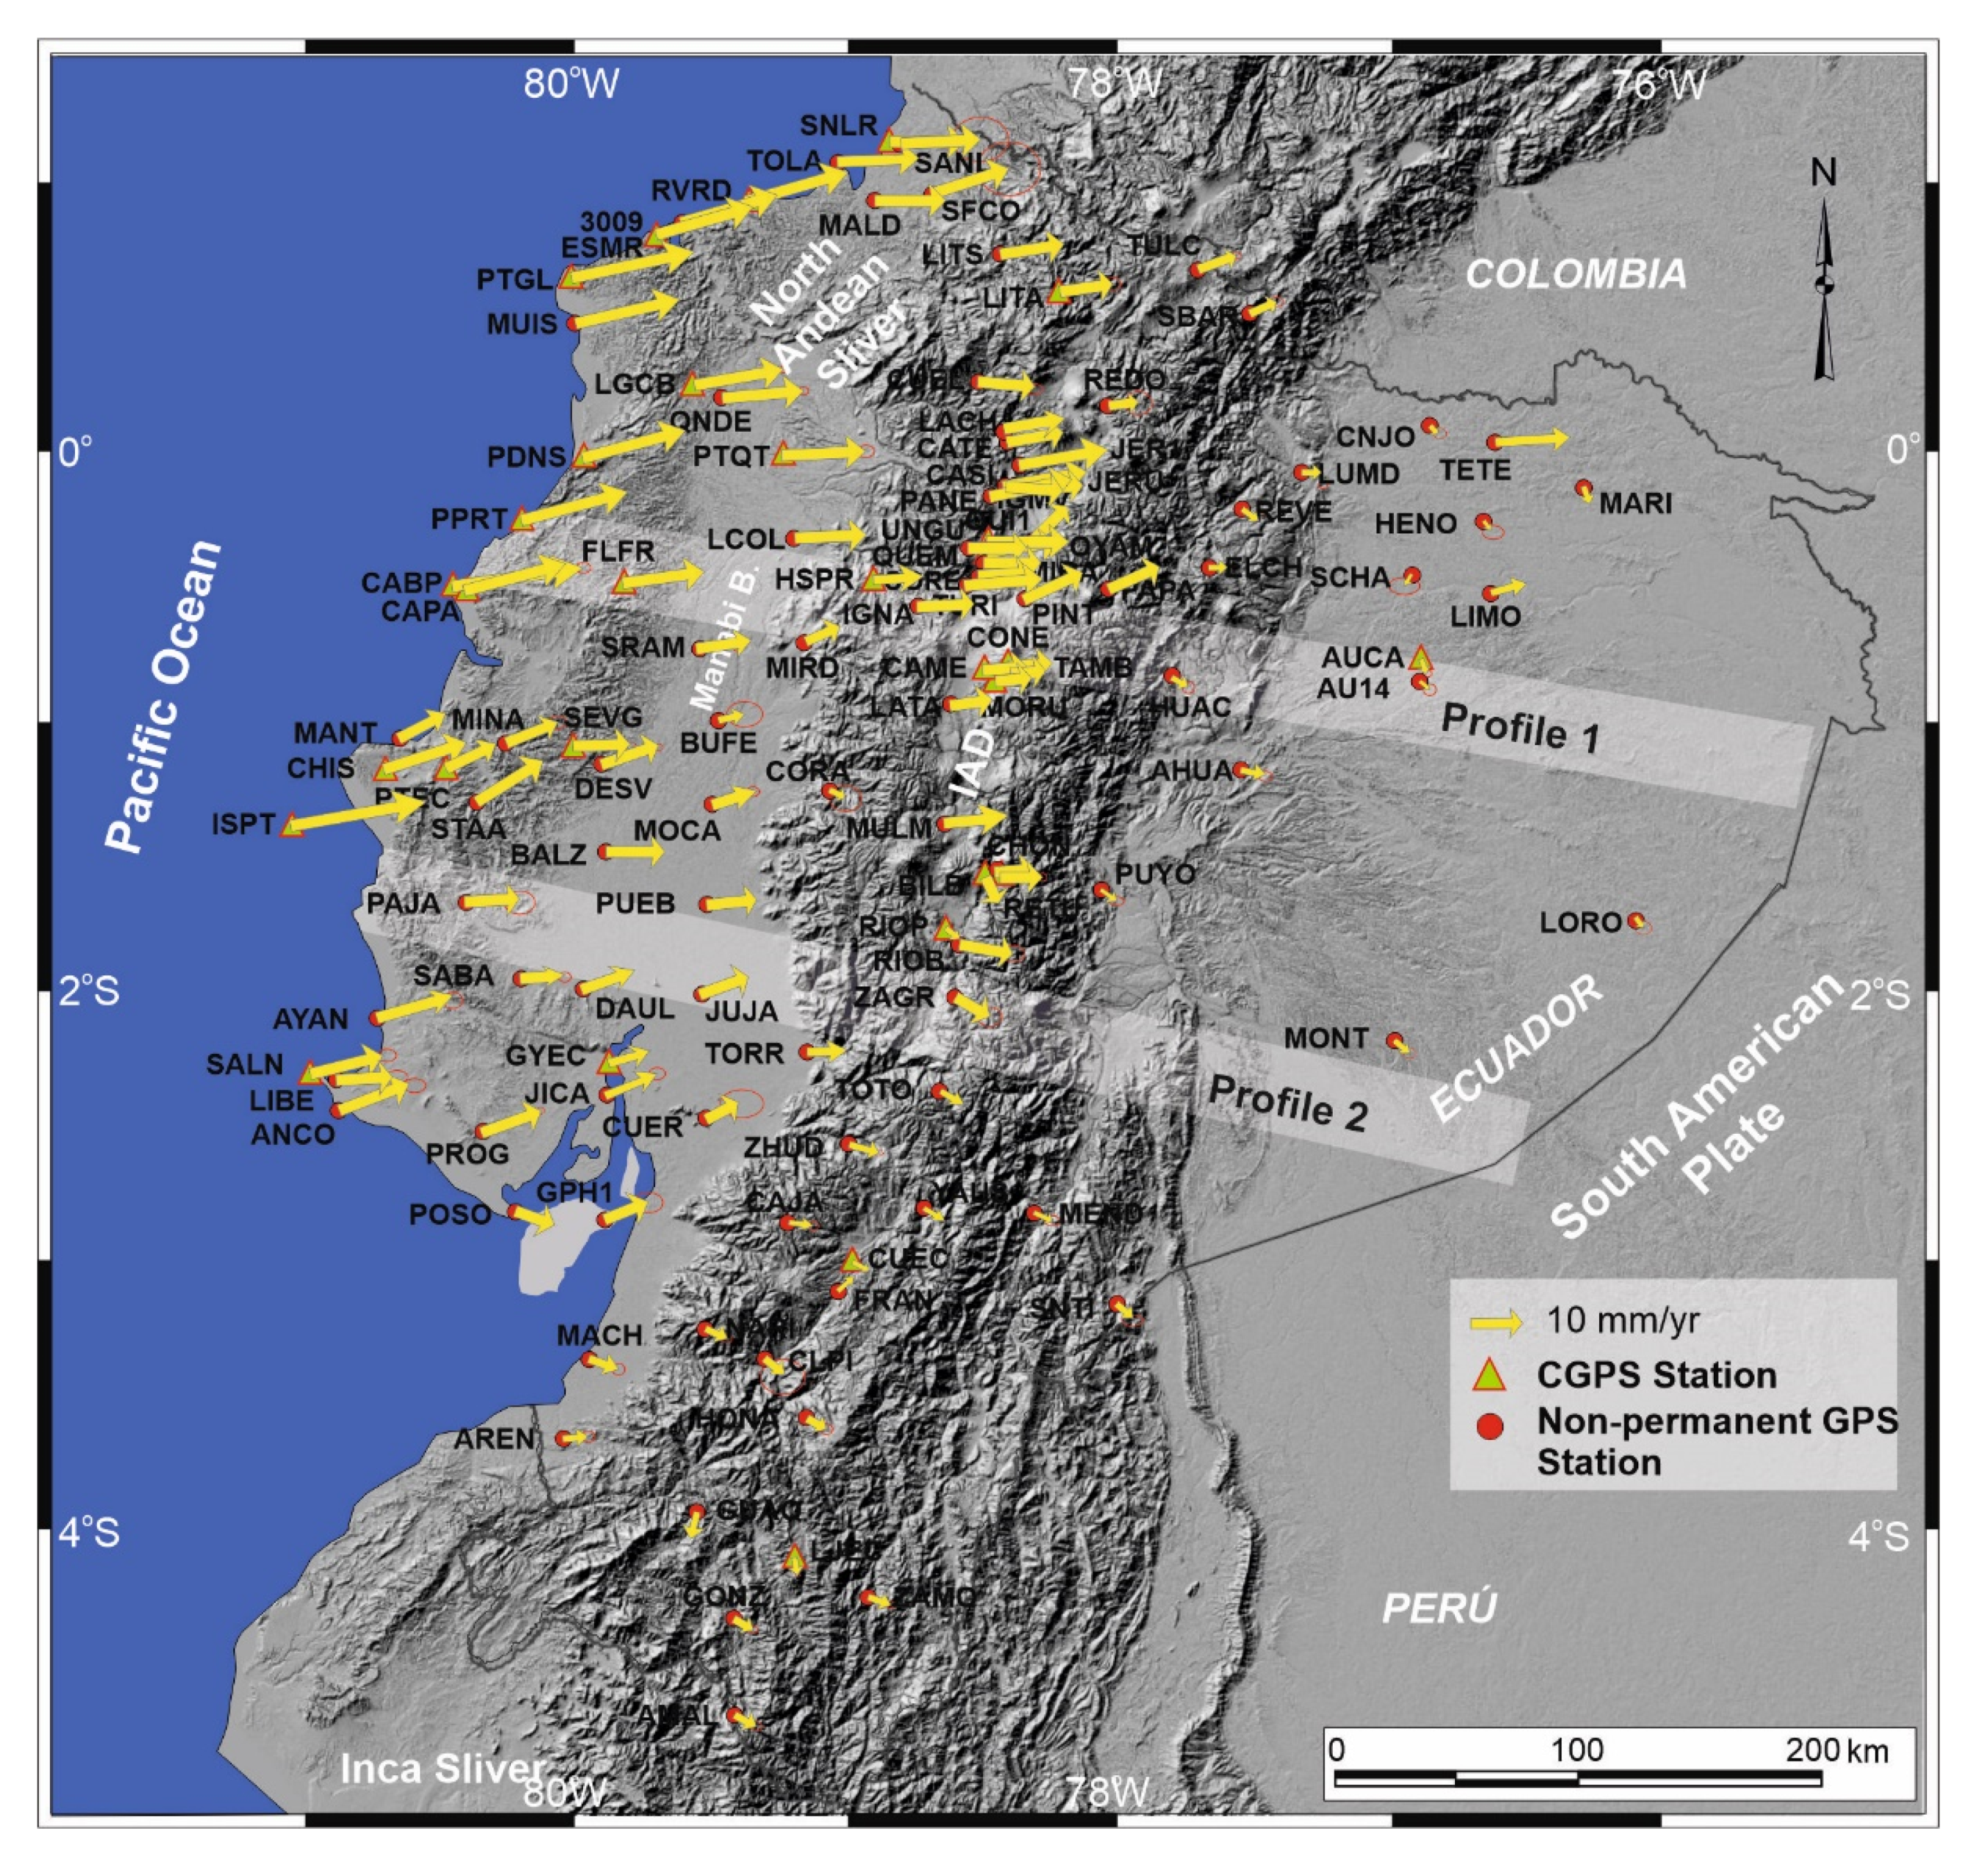 Sensors | Free Full-Text | GNSS Constraints to Active Tectonic Deformations  of the South American Continental Margin in Ecuador | HTML